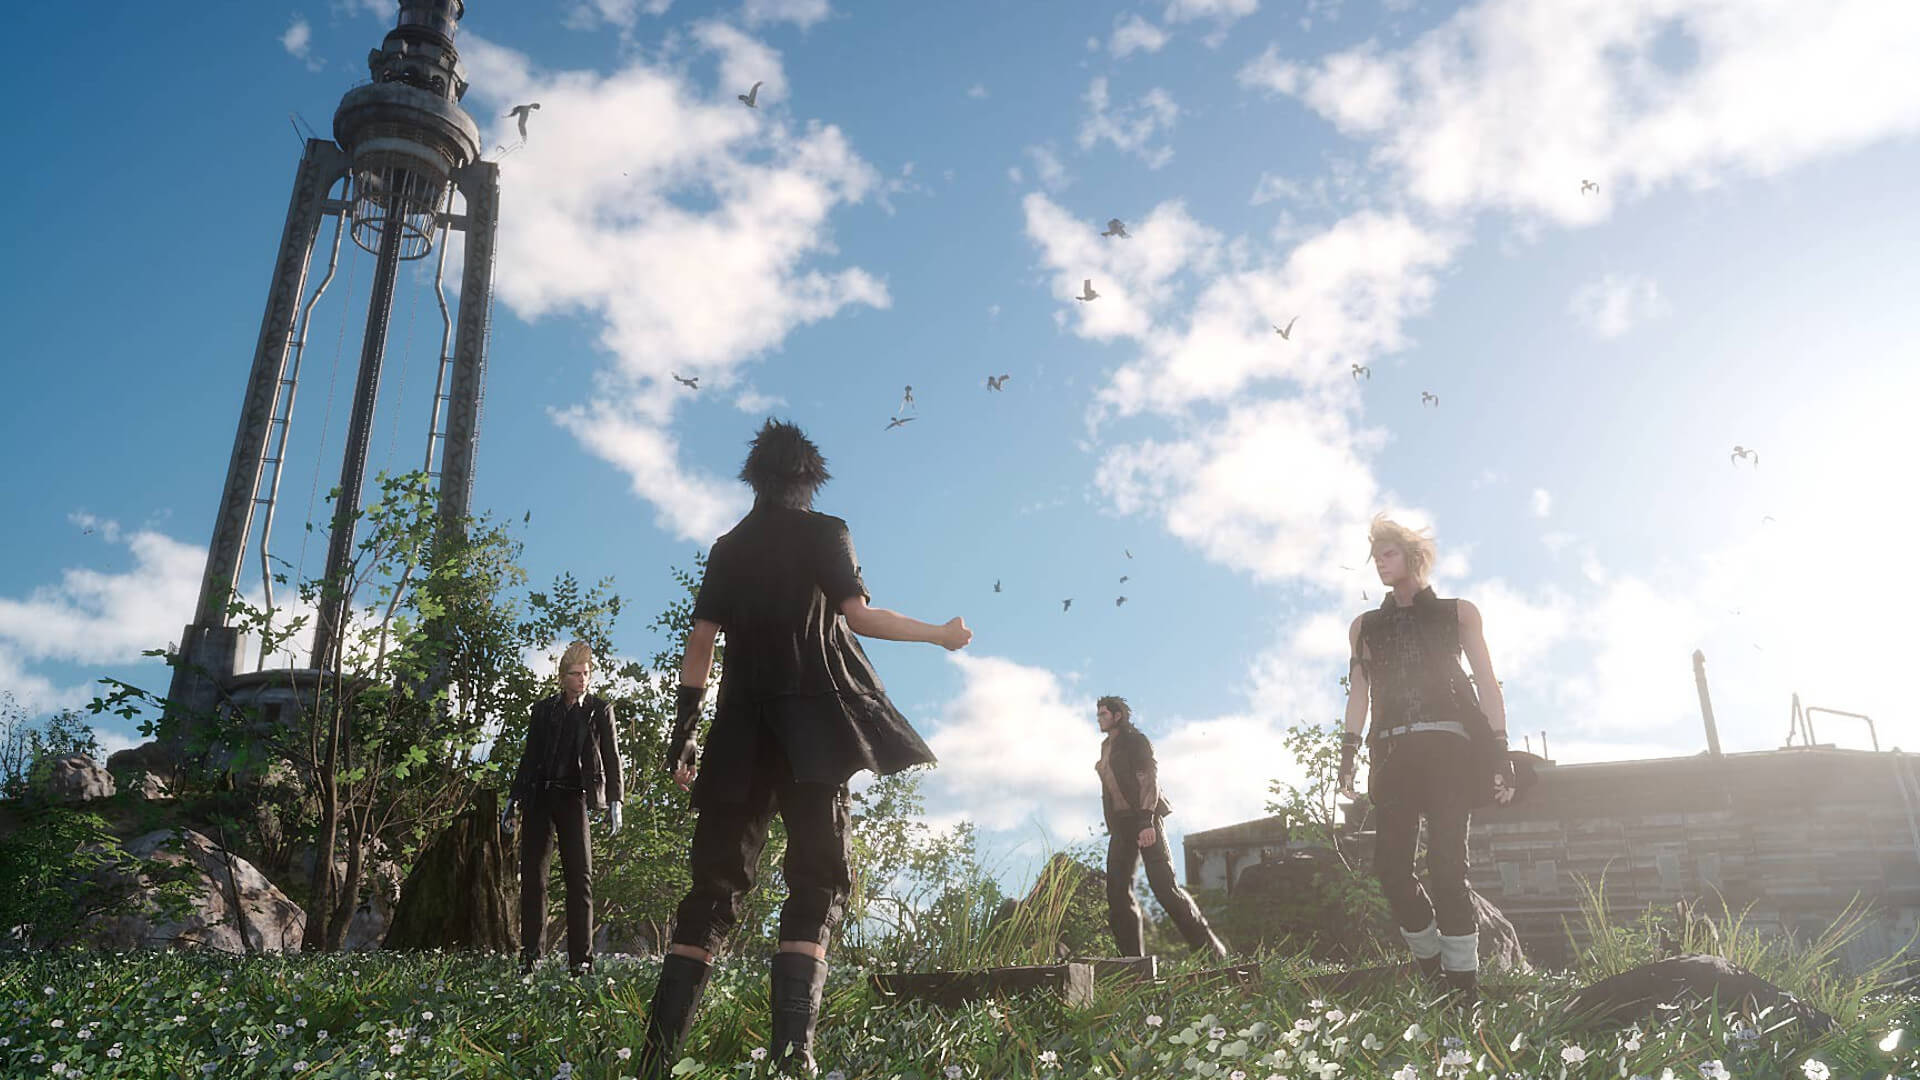 The party gathered in a field near a tower in Final Fantasy XV